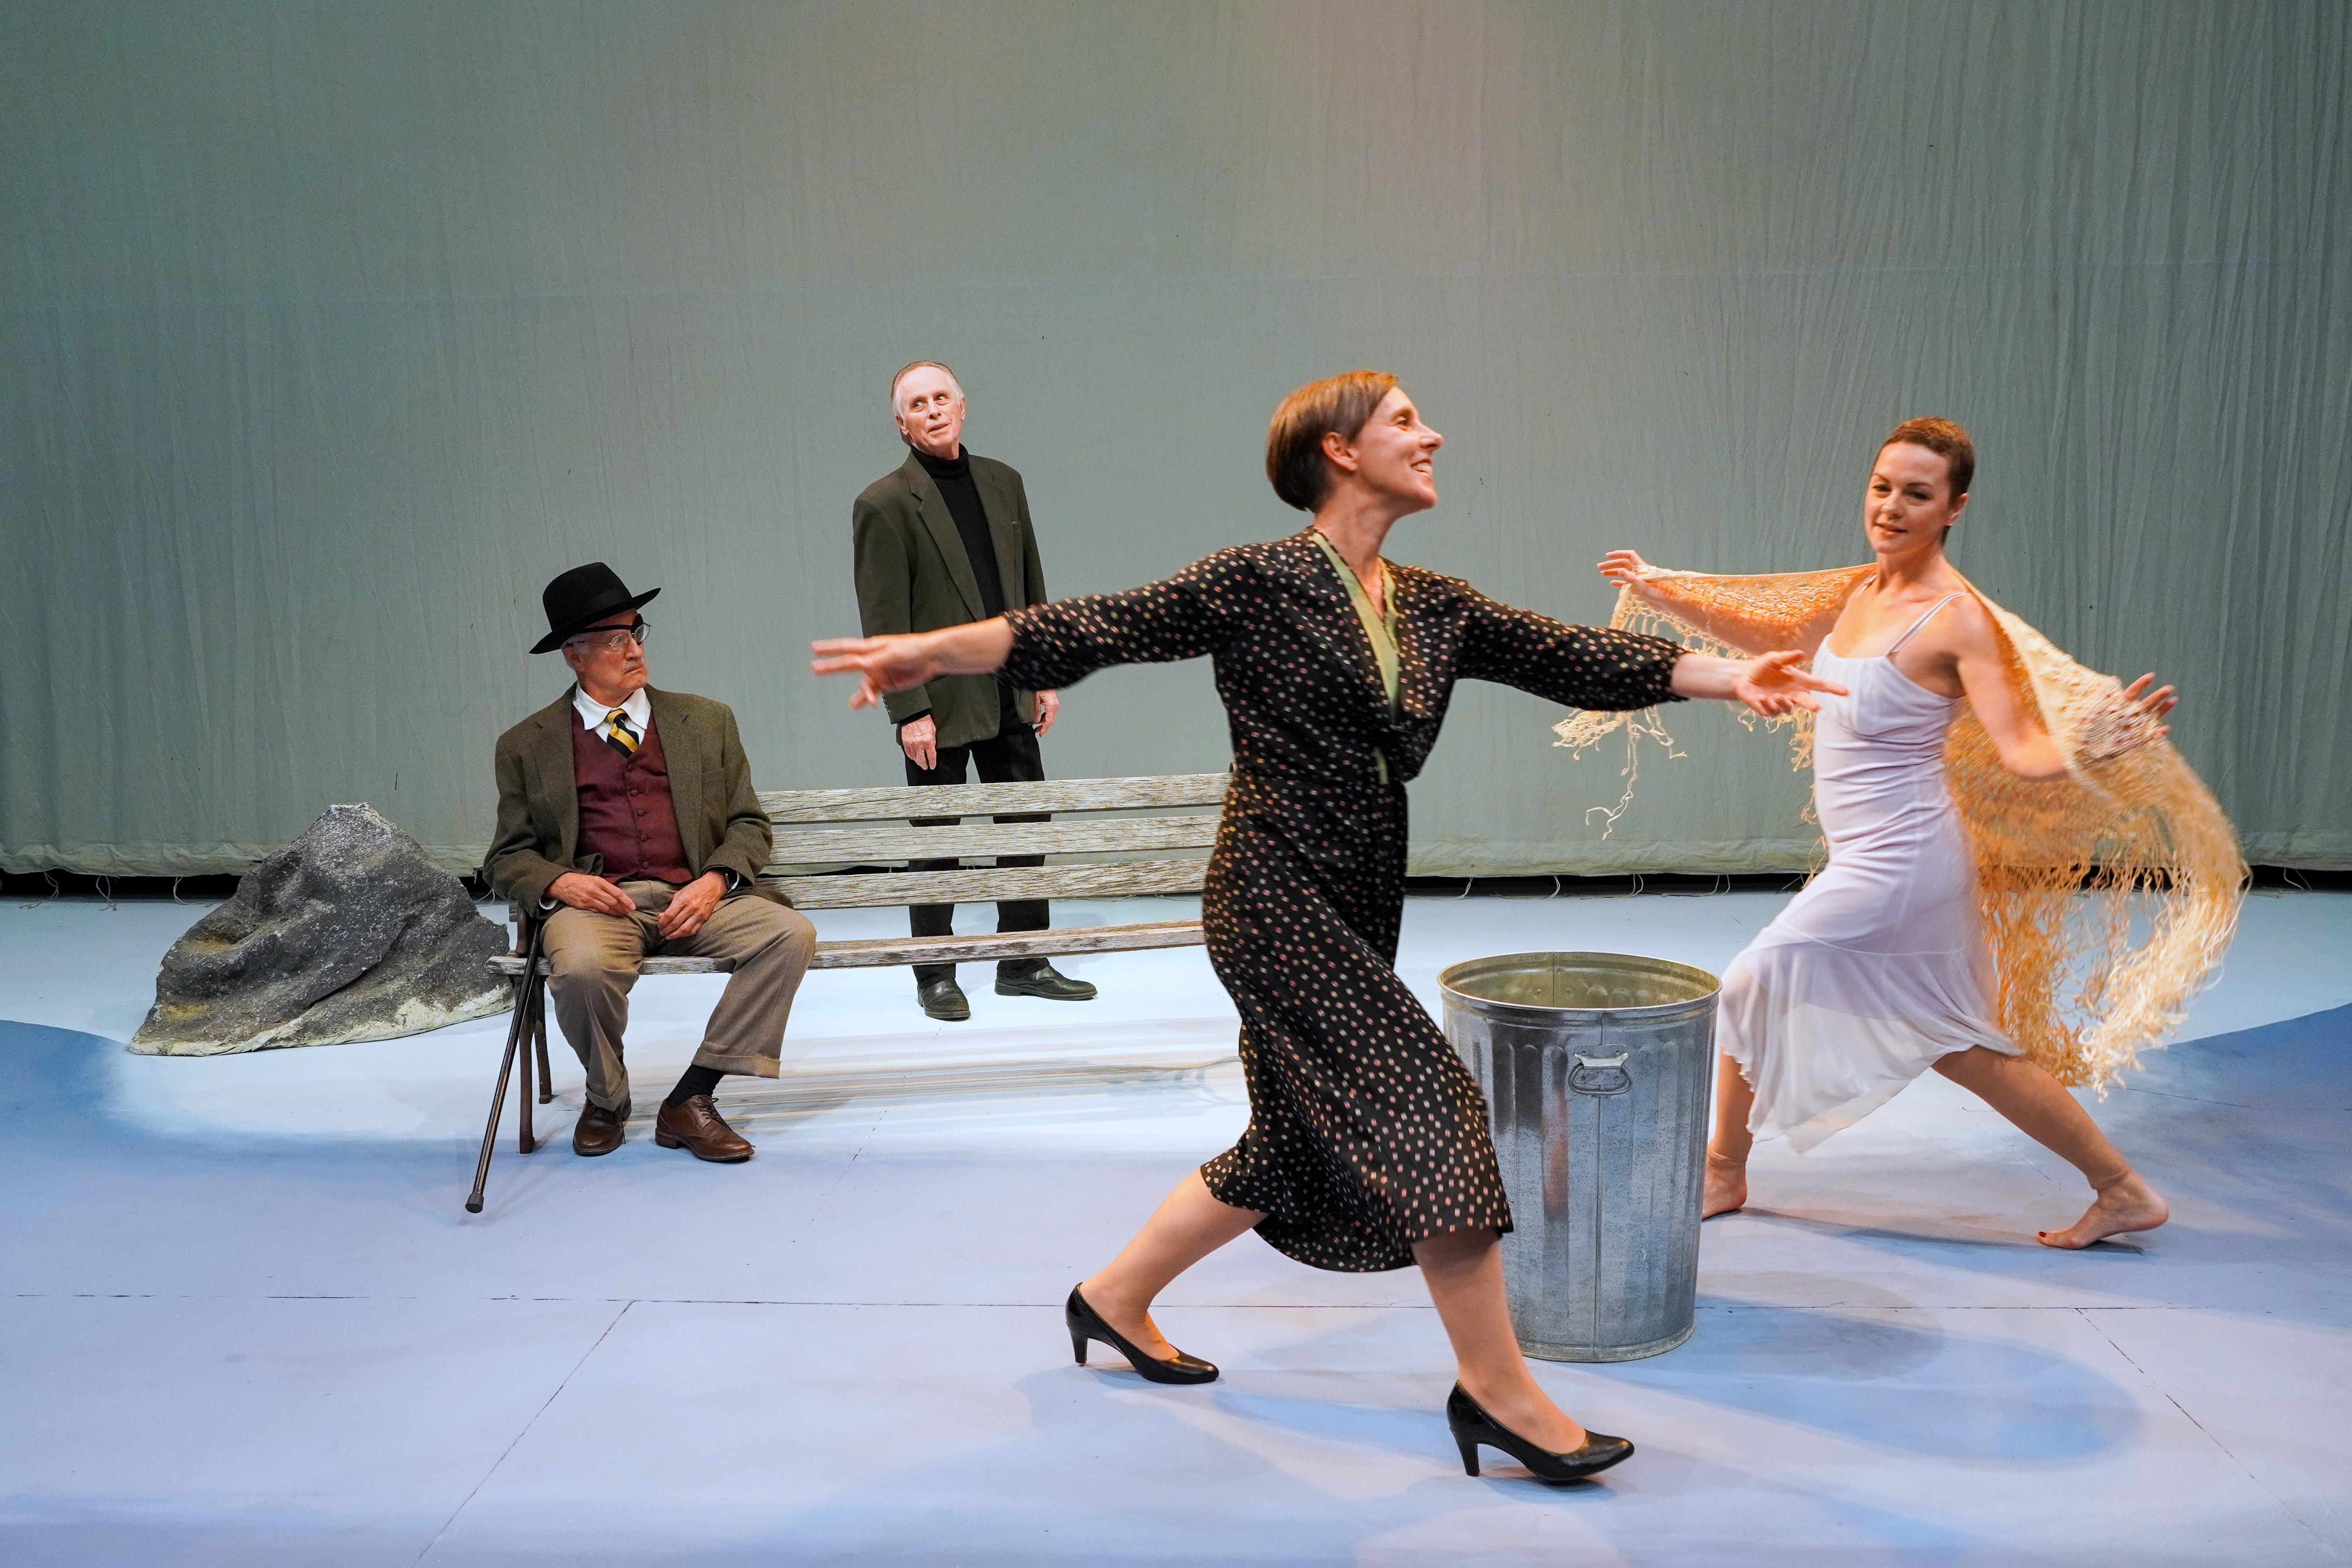 pale blue sky drop behind actors, large rock on left, sitting on bench in suit & vest, eye patch & glasses, black hat is James Joyce, standing behind him in black slacks, turtleneck & jacket is Samuel Beckett, in foreground on right dancing while circling a trashcan are actors playing Suzanne & Lucia, in dresses, in a skipping pose